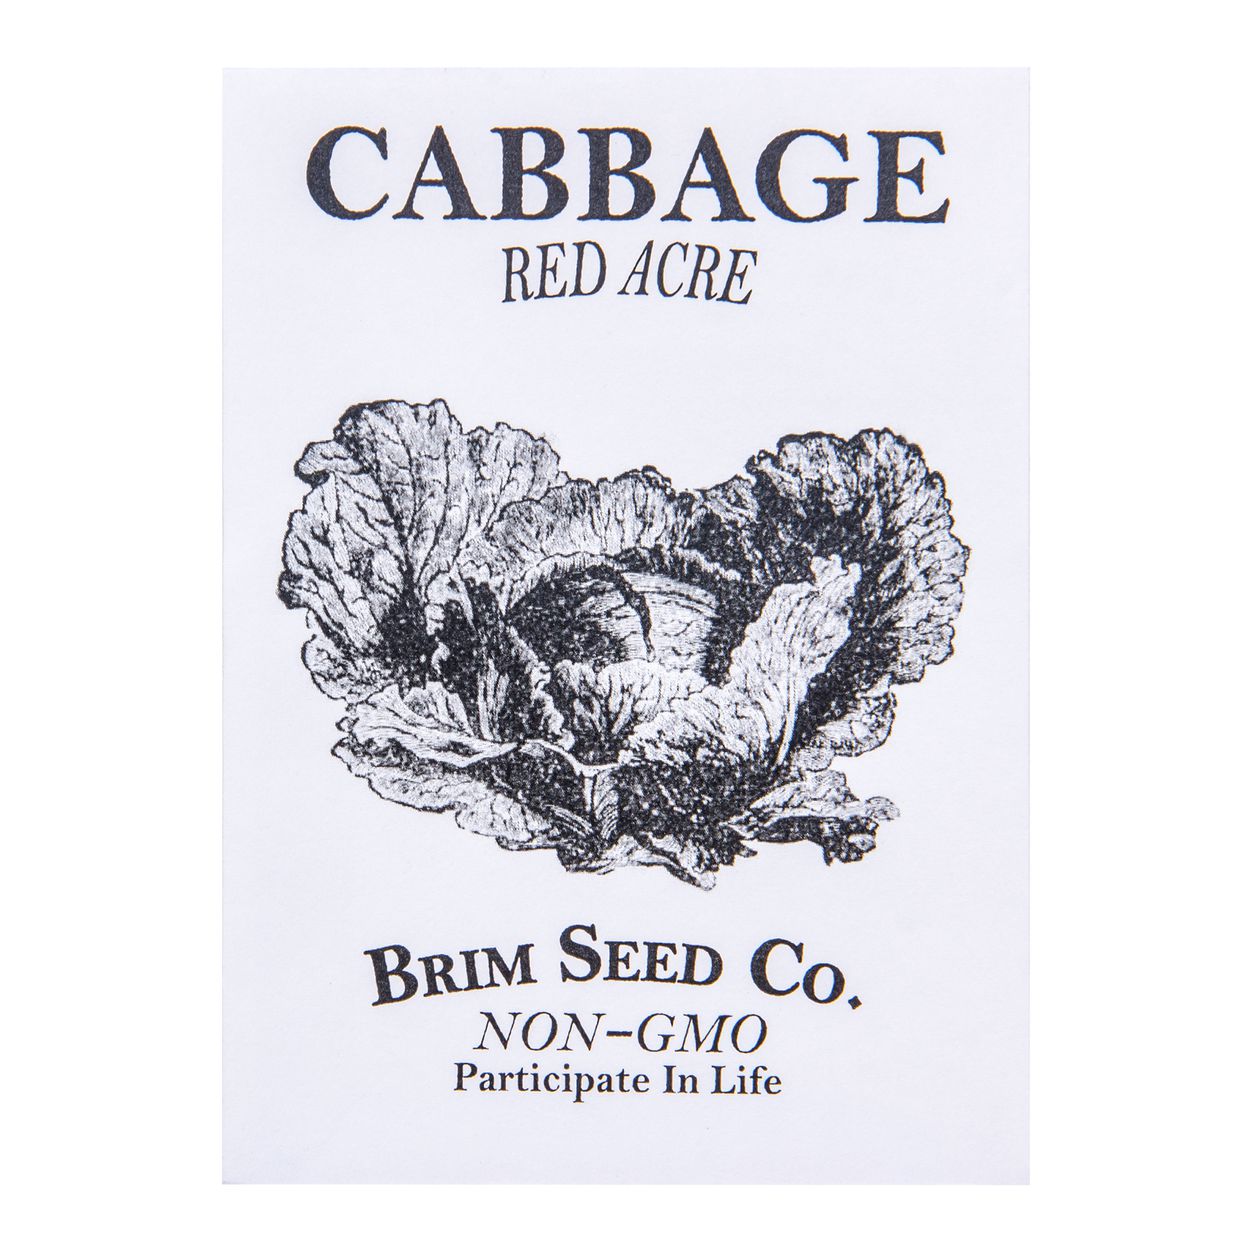 Brim Seed Co. - Red Acre Cabbage Heirloom Seed